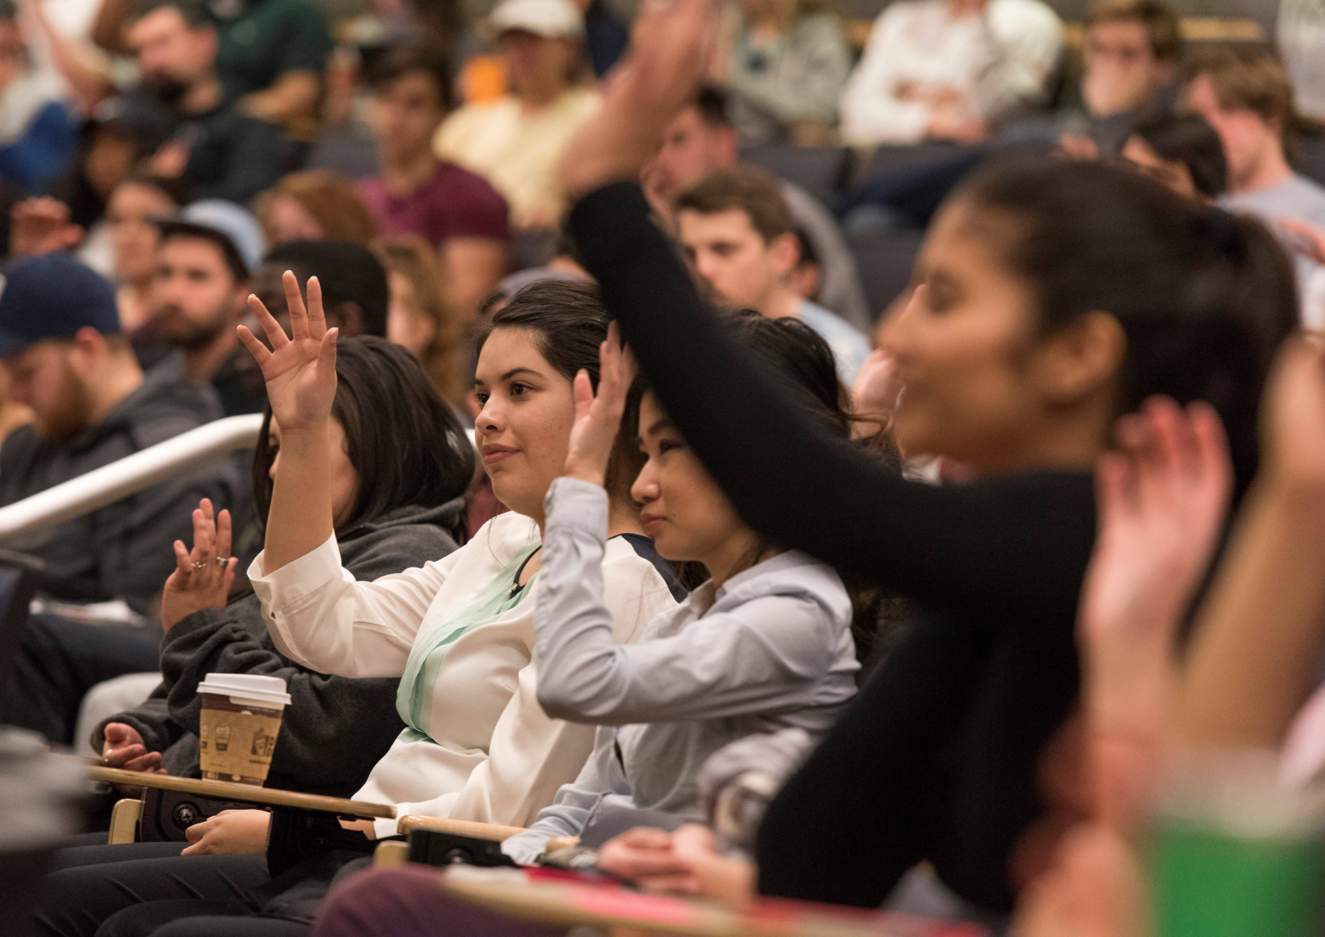 Students with raised hands sitting in a large lecture hall